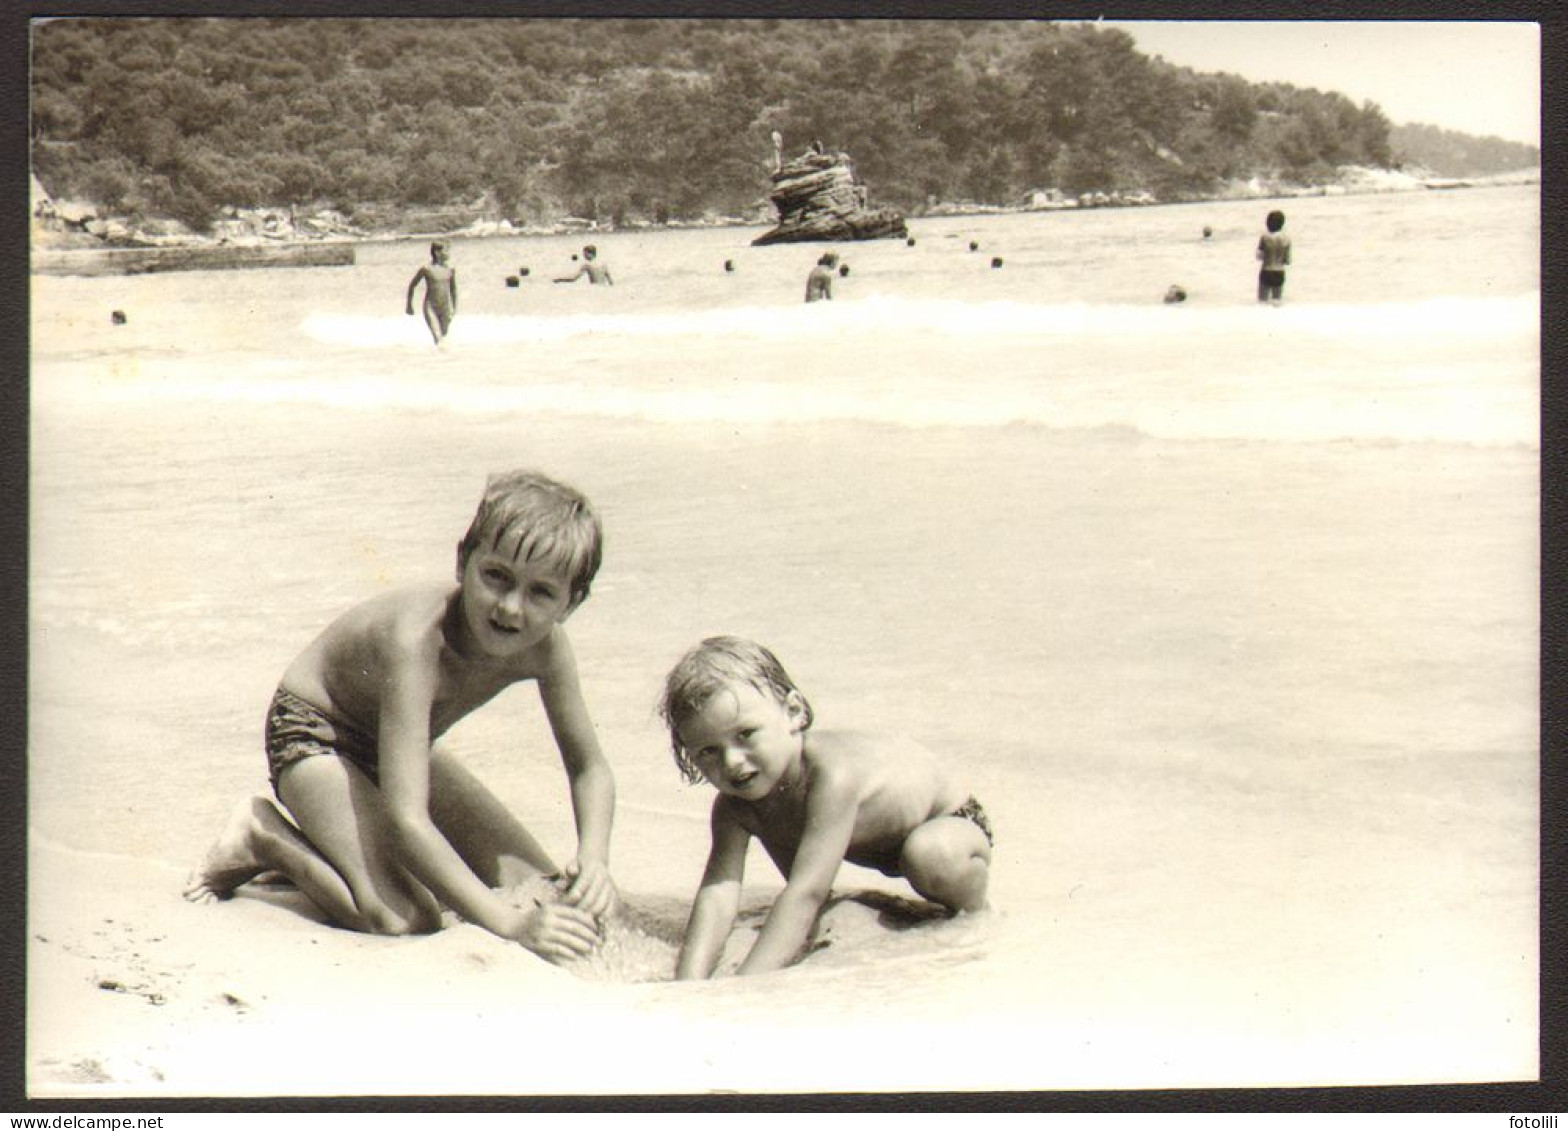 Two Boys   On Beach  Old Photo 7x11 Cm #41302 - Personnes Anonymes